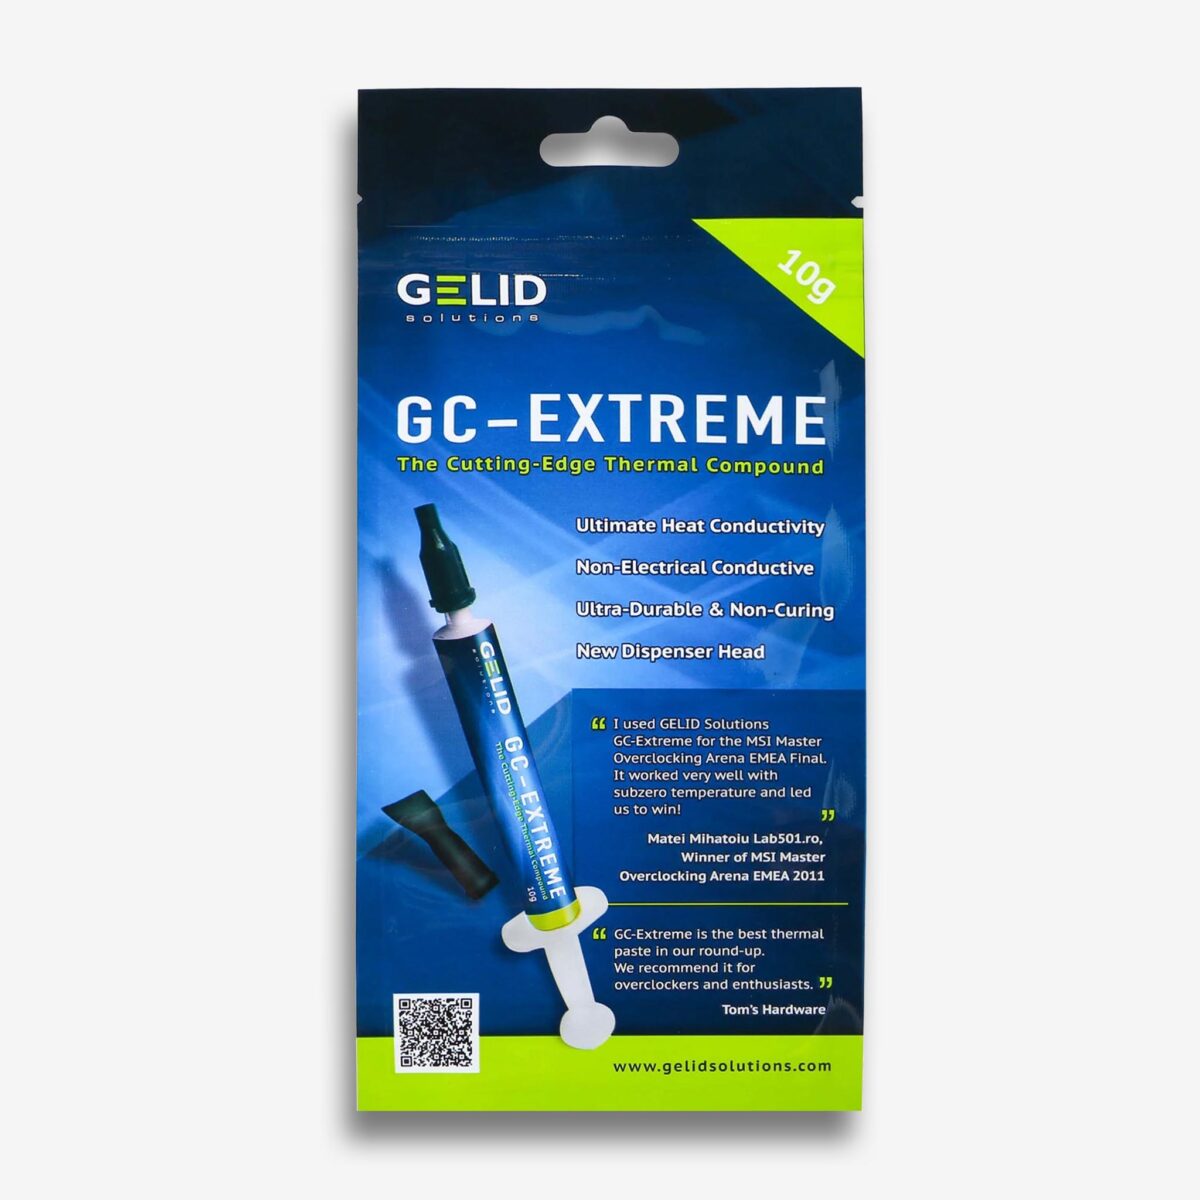 GELID GC-Extreme Thermal Paste 10g – 8.5W/mk [Package Damaged]